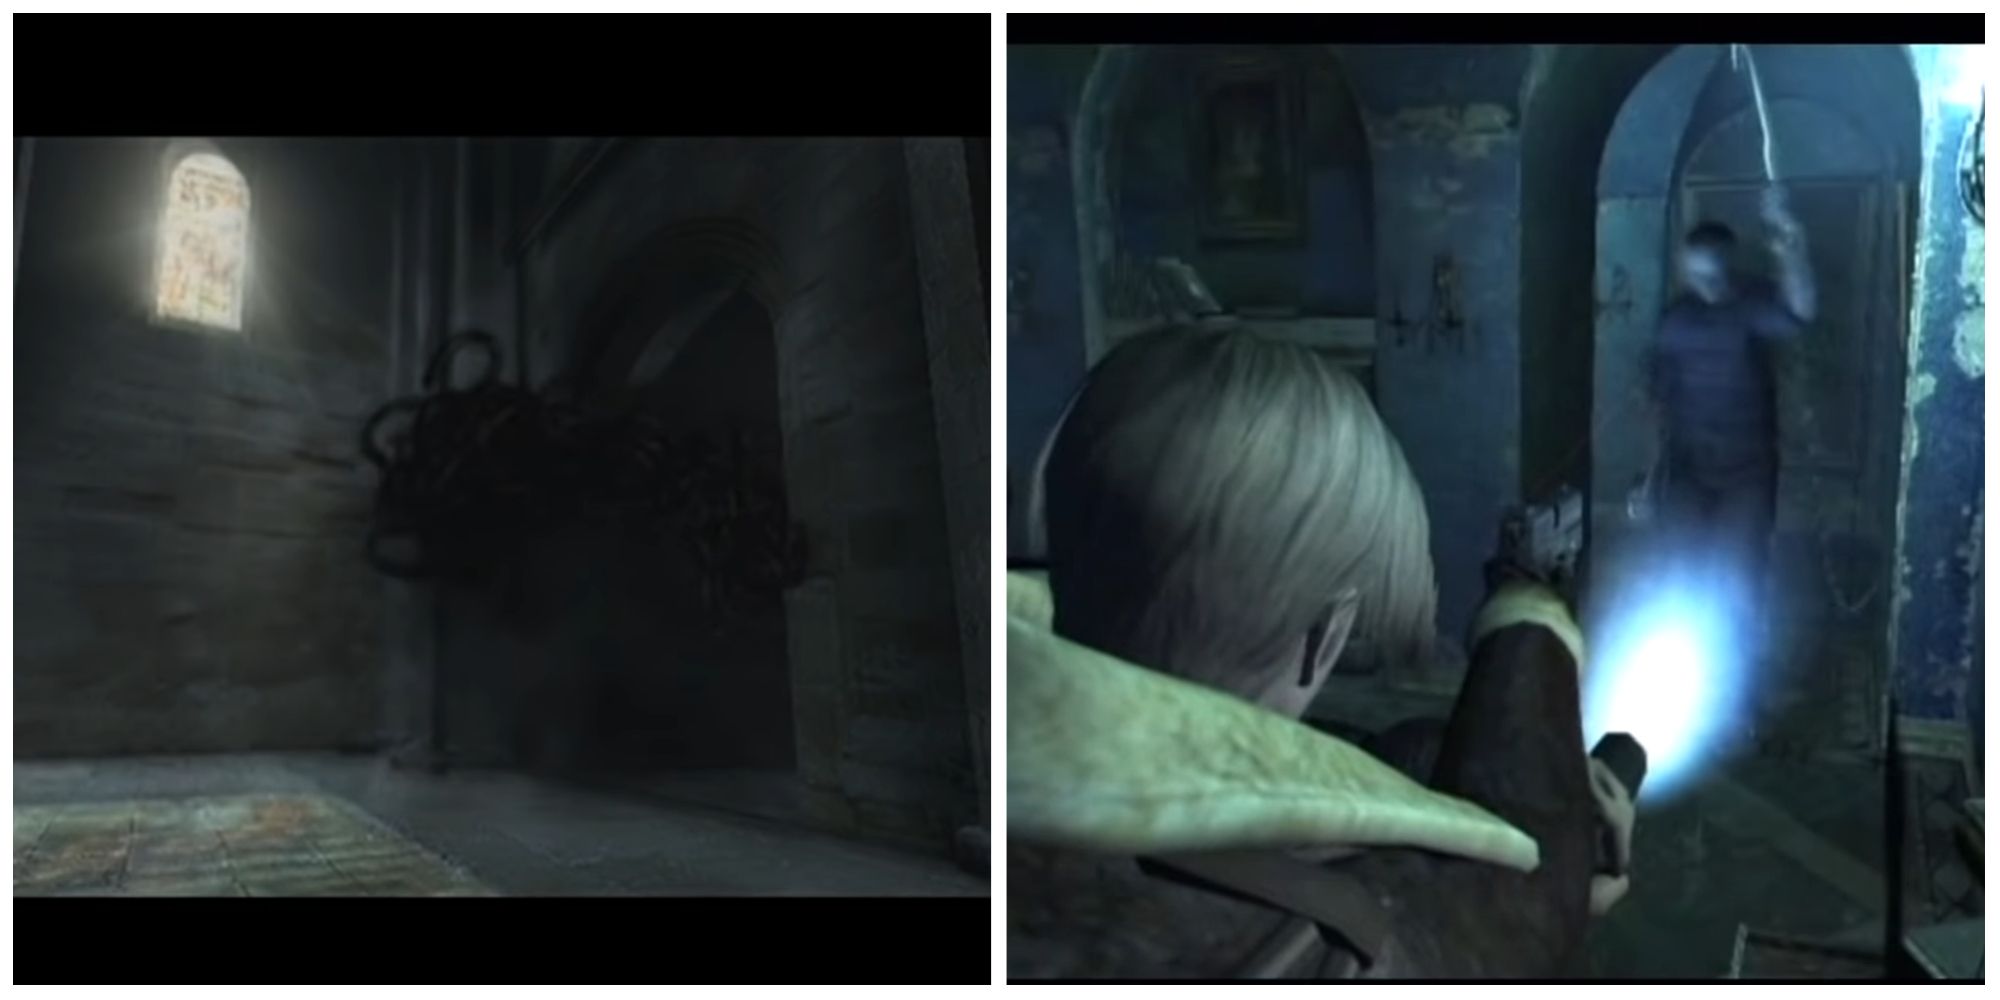 The Uroboros like enemy from the castle version of Resident Evil 4 and the Hook Man from the Hallucination version of RE4.